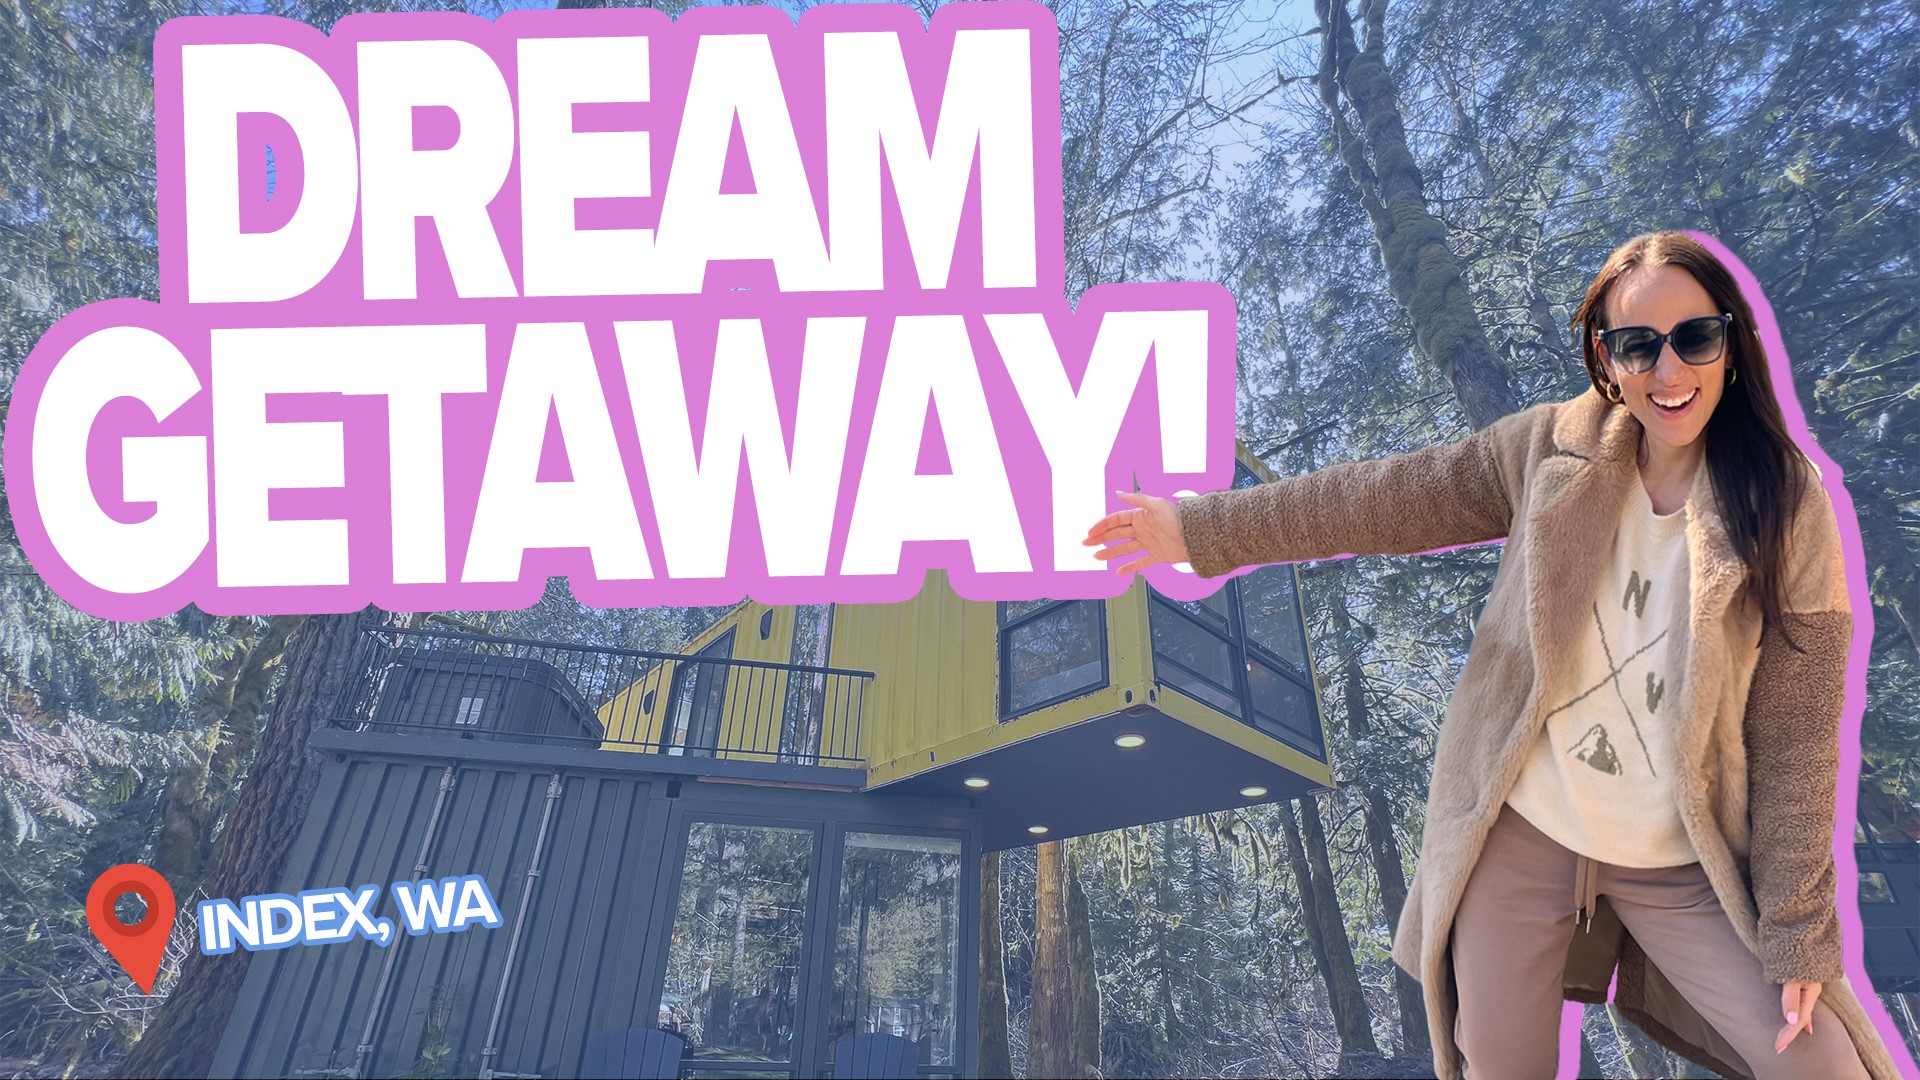 Want a romantic cabin getaway? I have the perfect spot and if you watch the entire video, YOU will see how to enter to win a FREE night stay!